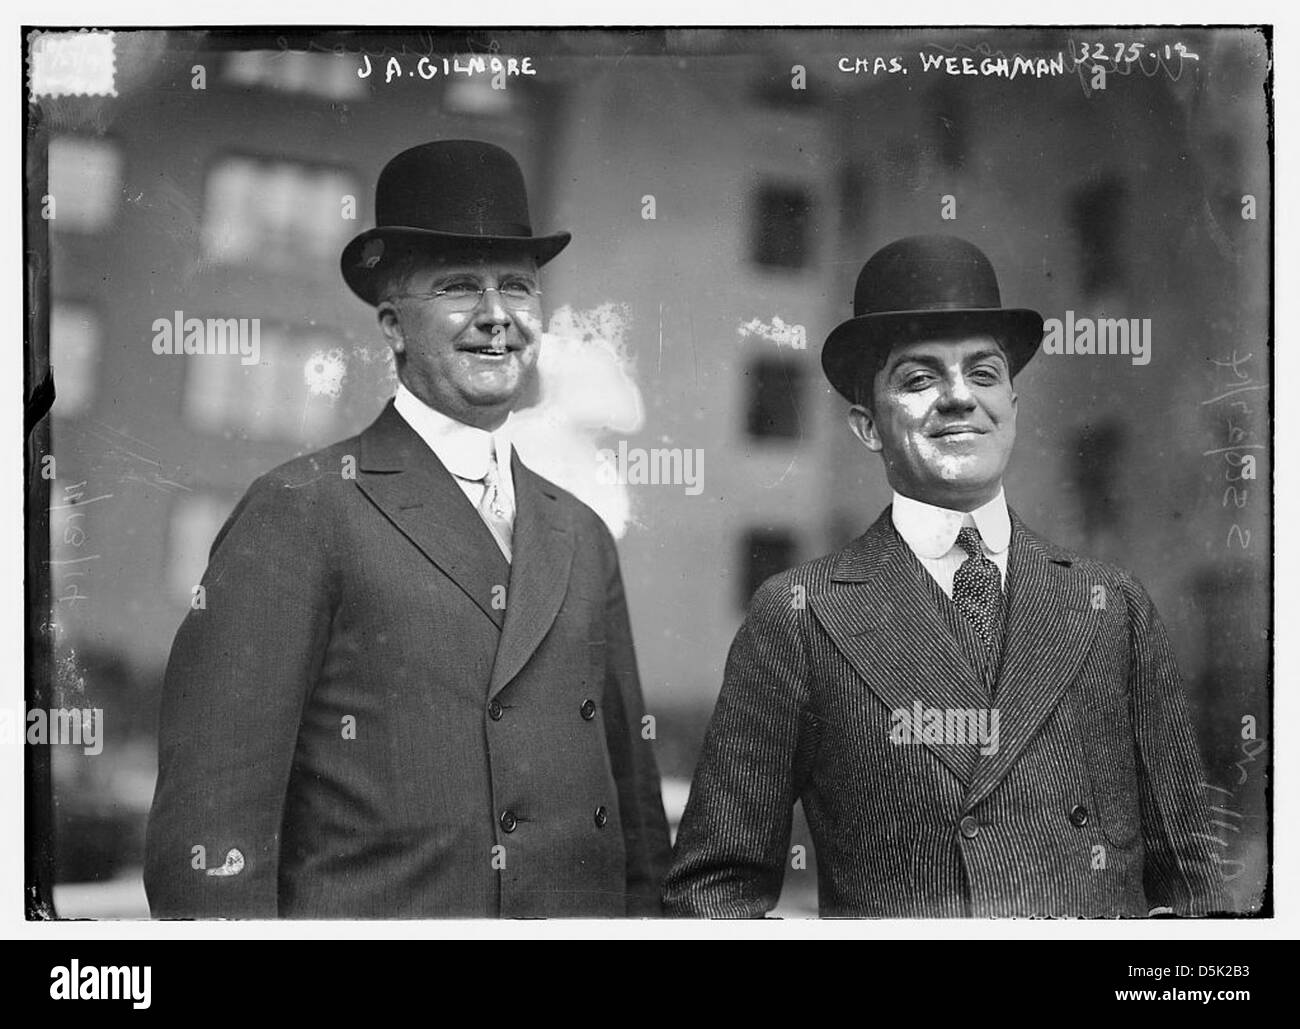 [James A. Gilmore, President, Federal League and Charles Weeghman, President, Chicago Federal League team (baseball)] (LOC) Stock Photo